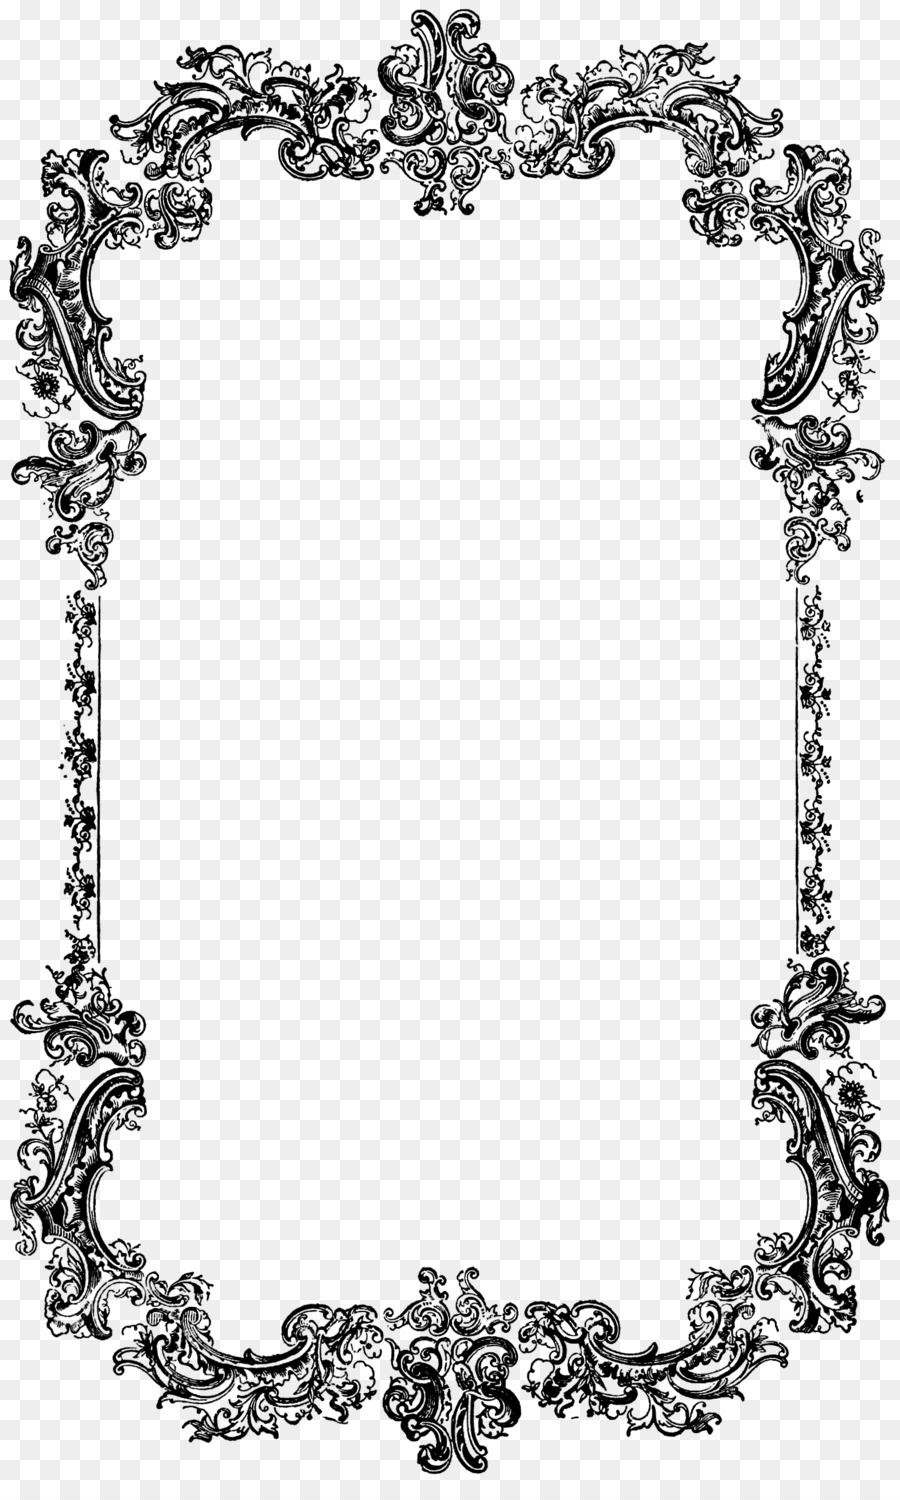 Frame border clipart victorian pictures on Cliparts Pub 2020! ð